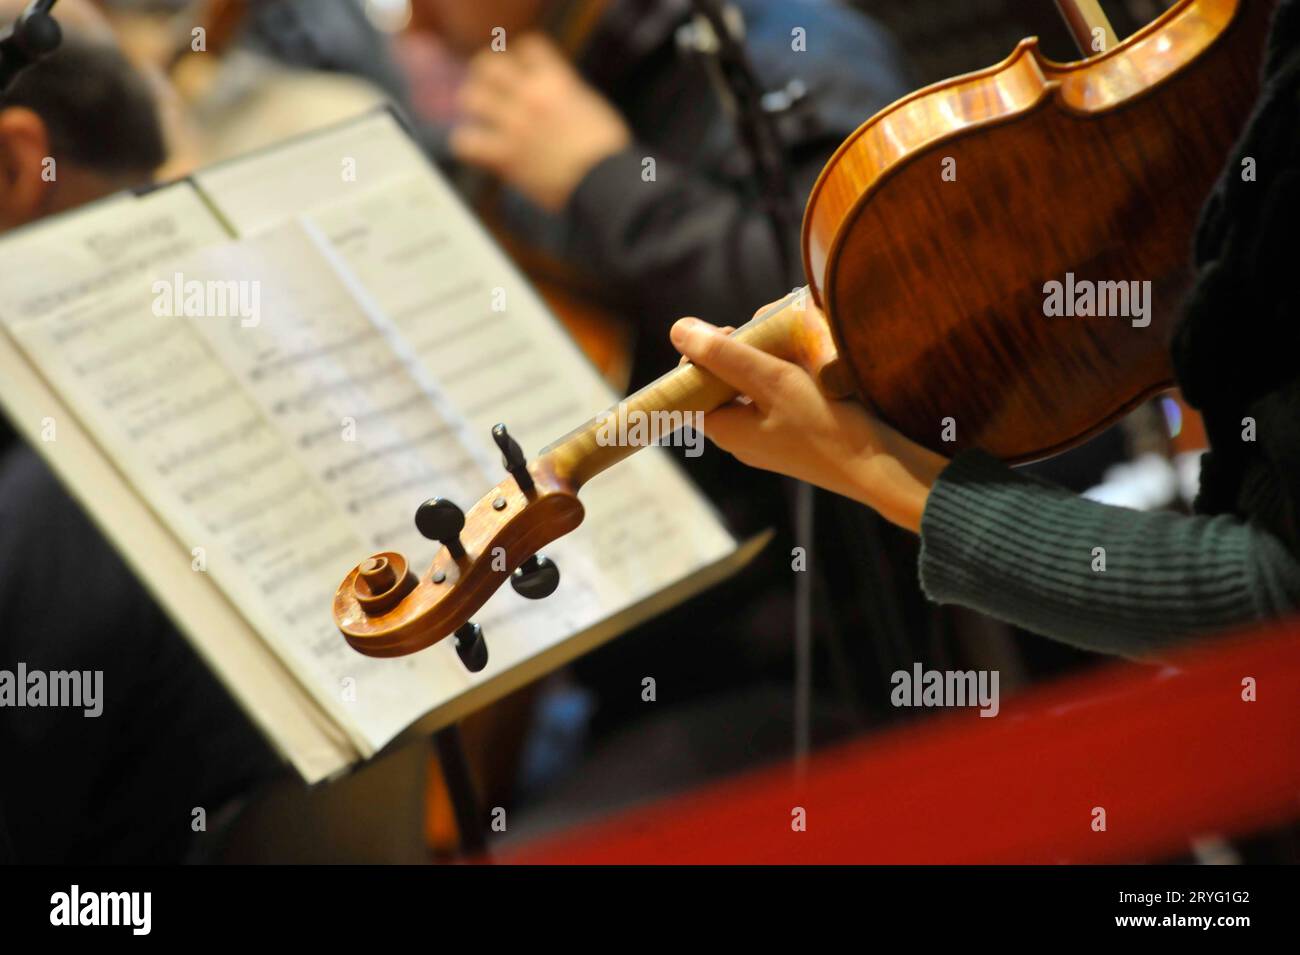 A violinist with violin plays in an orchestra Stock Photo